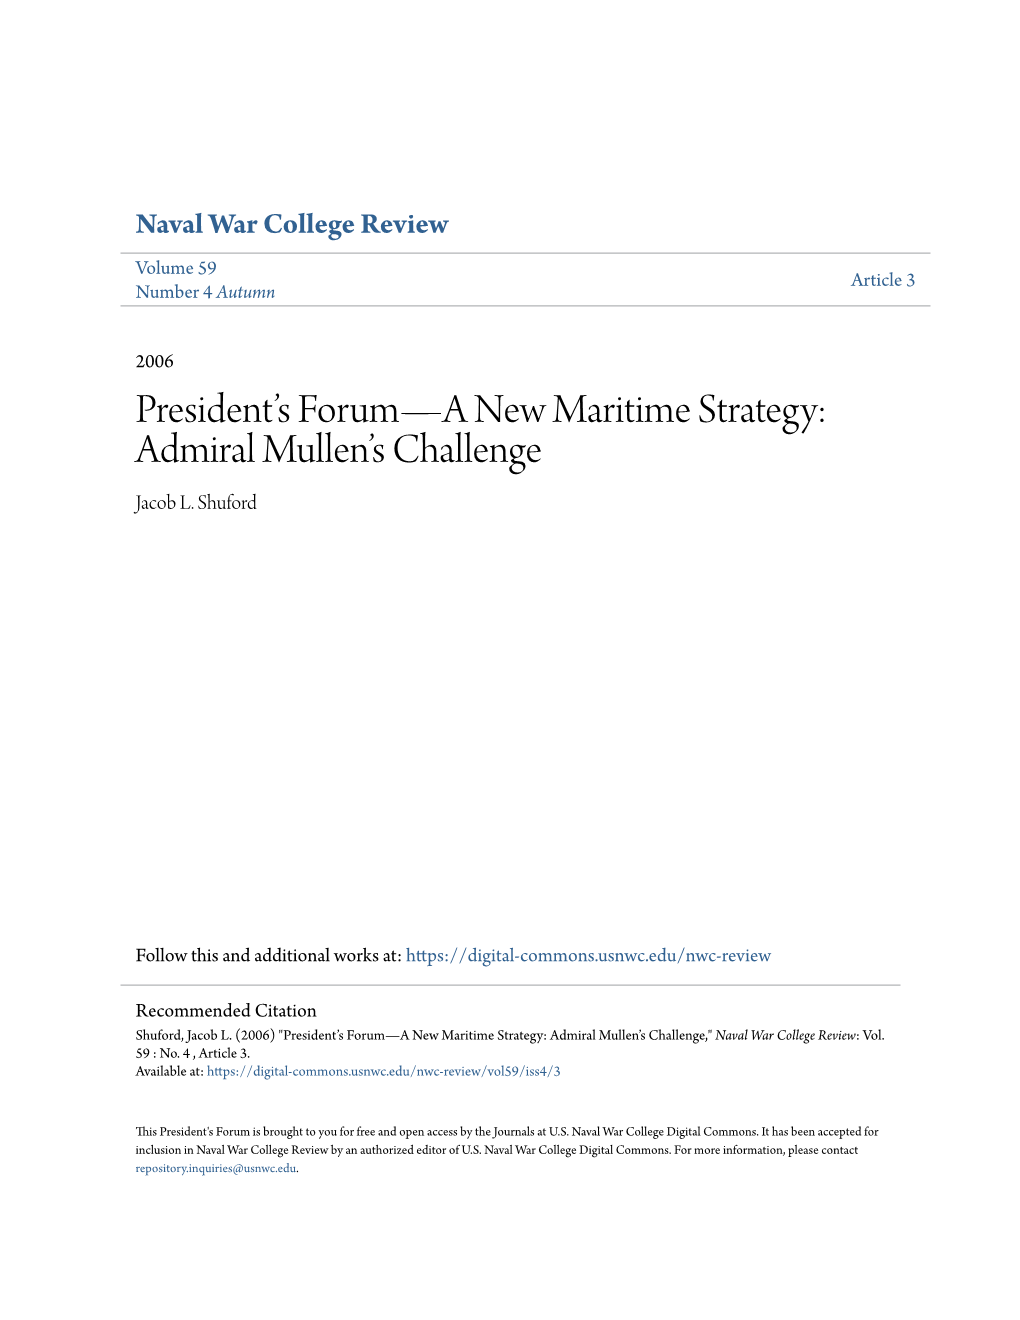 President's Forum—A New Maritime Strategy: Admiral Mullen's Challenge